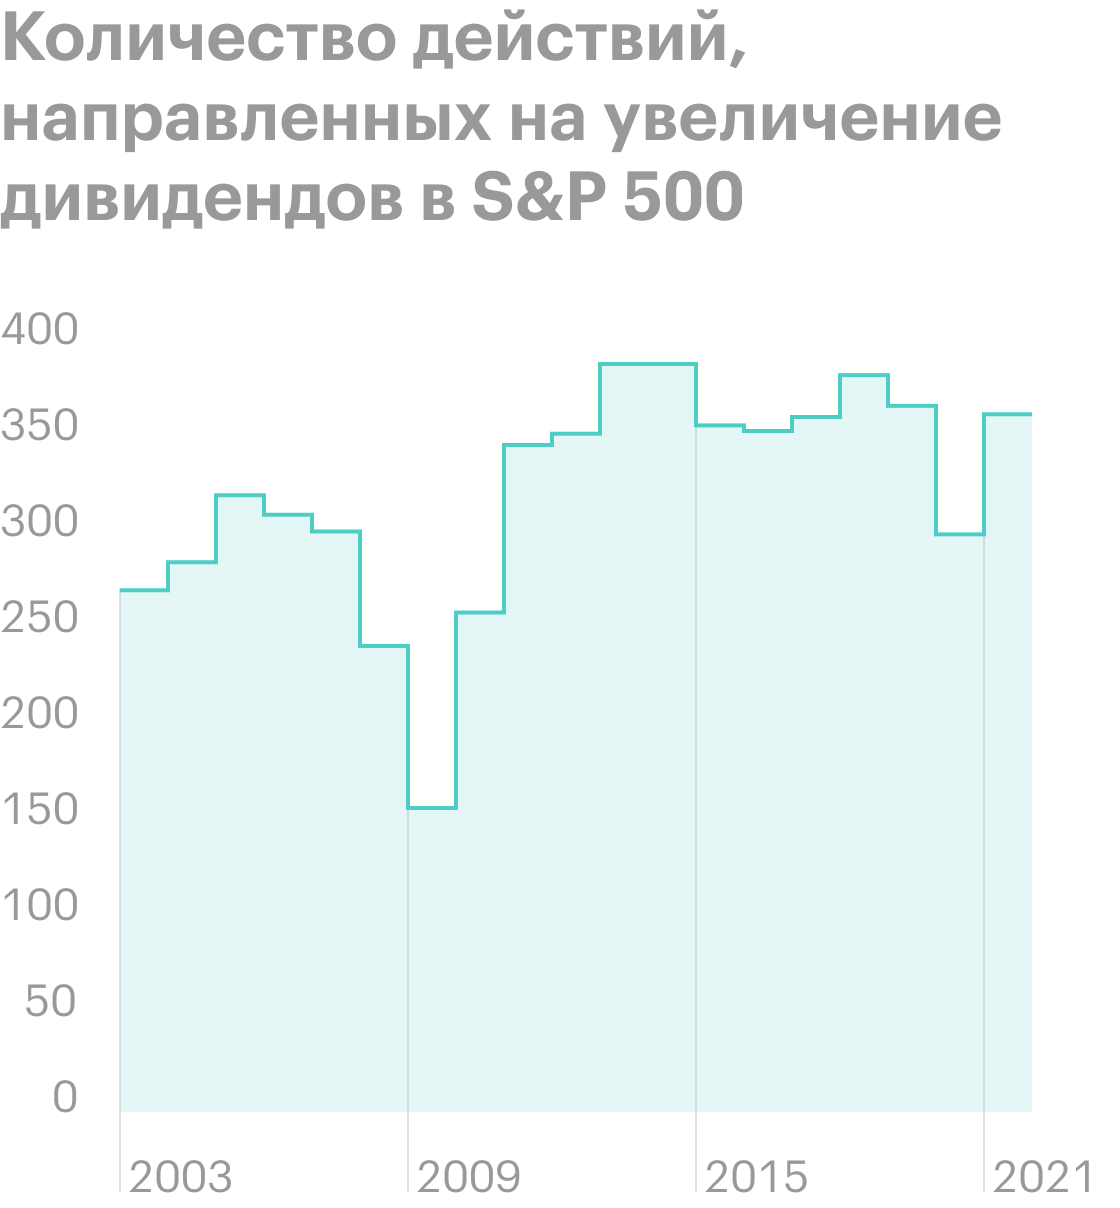 Источник: The Daily Shot, the number of positive dividend actions by year